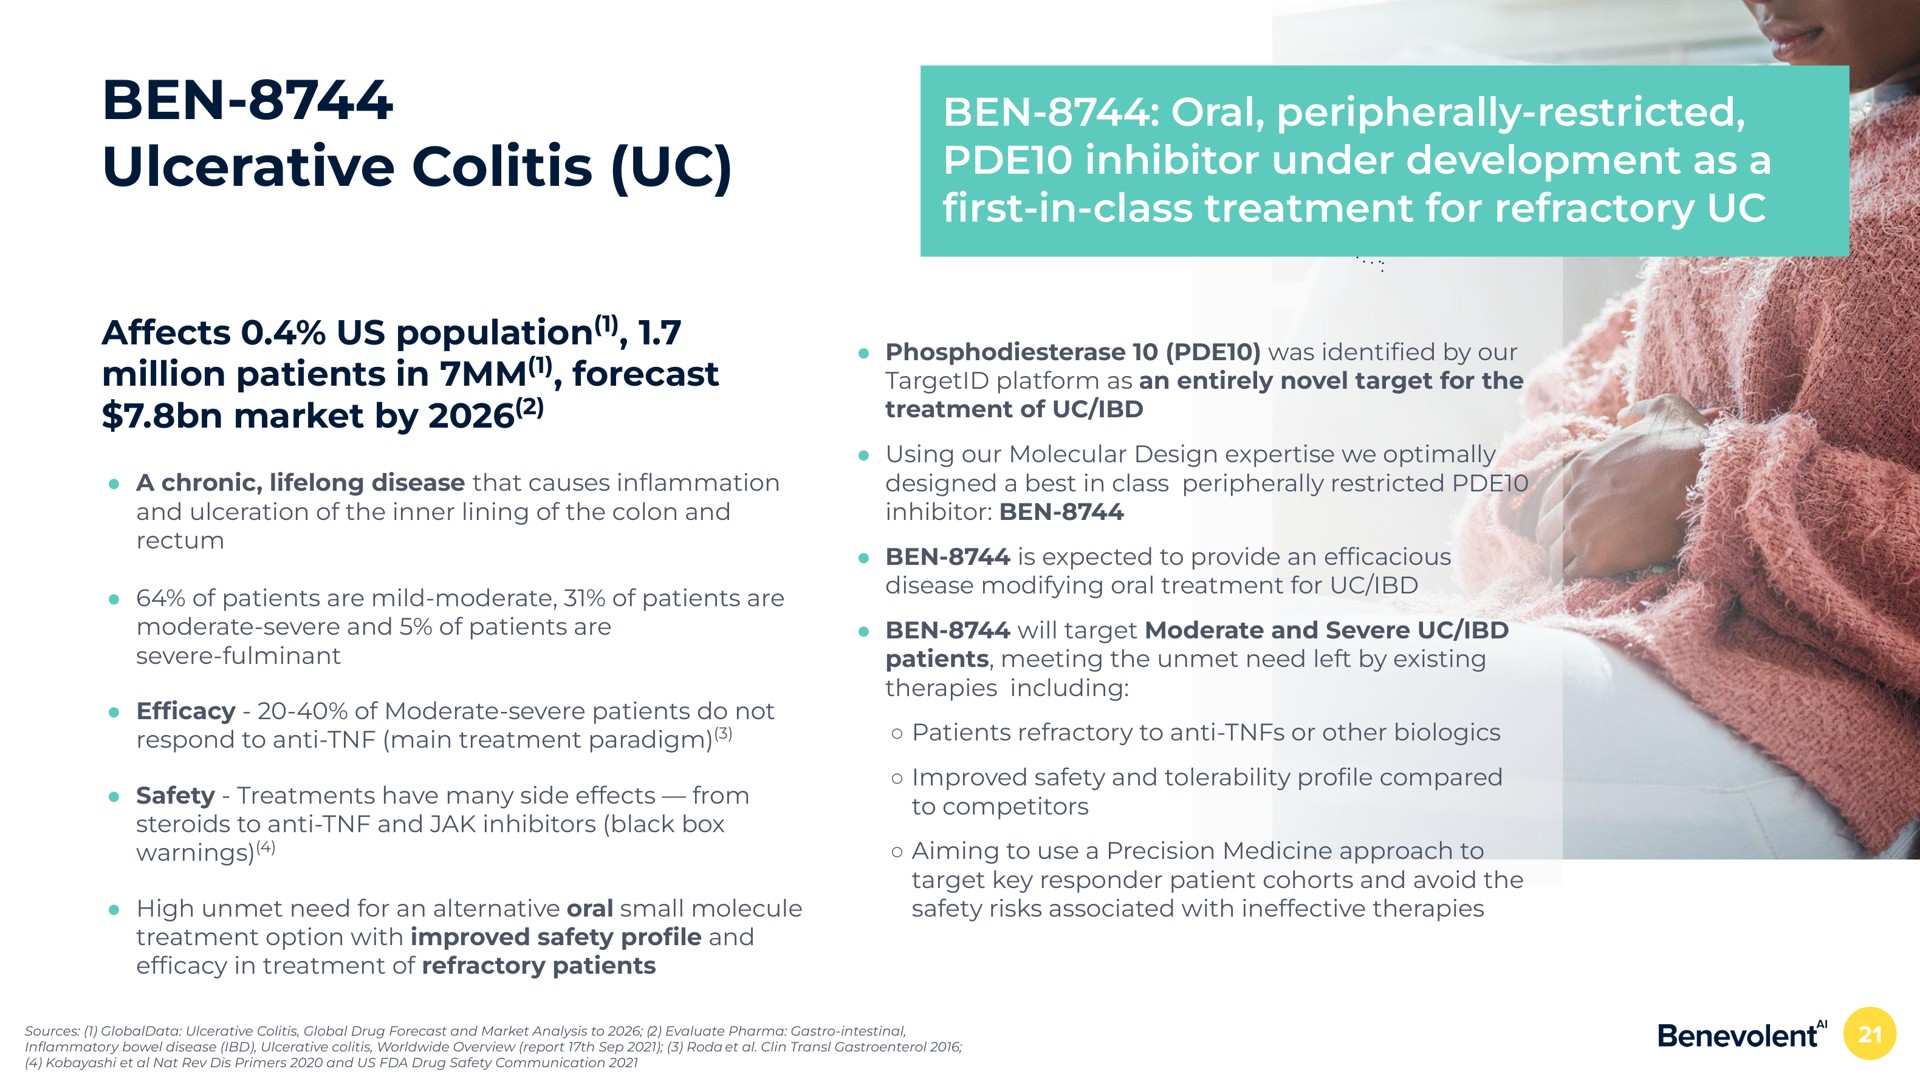 ben ulcerative colitis ben oral peripherally restricted inhibitor under development as a in class treatment for refractory affects us population million patients in forecast market by | BenevolentAI